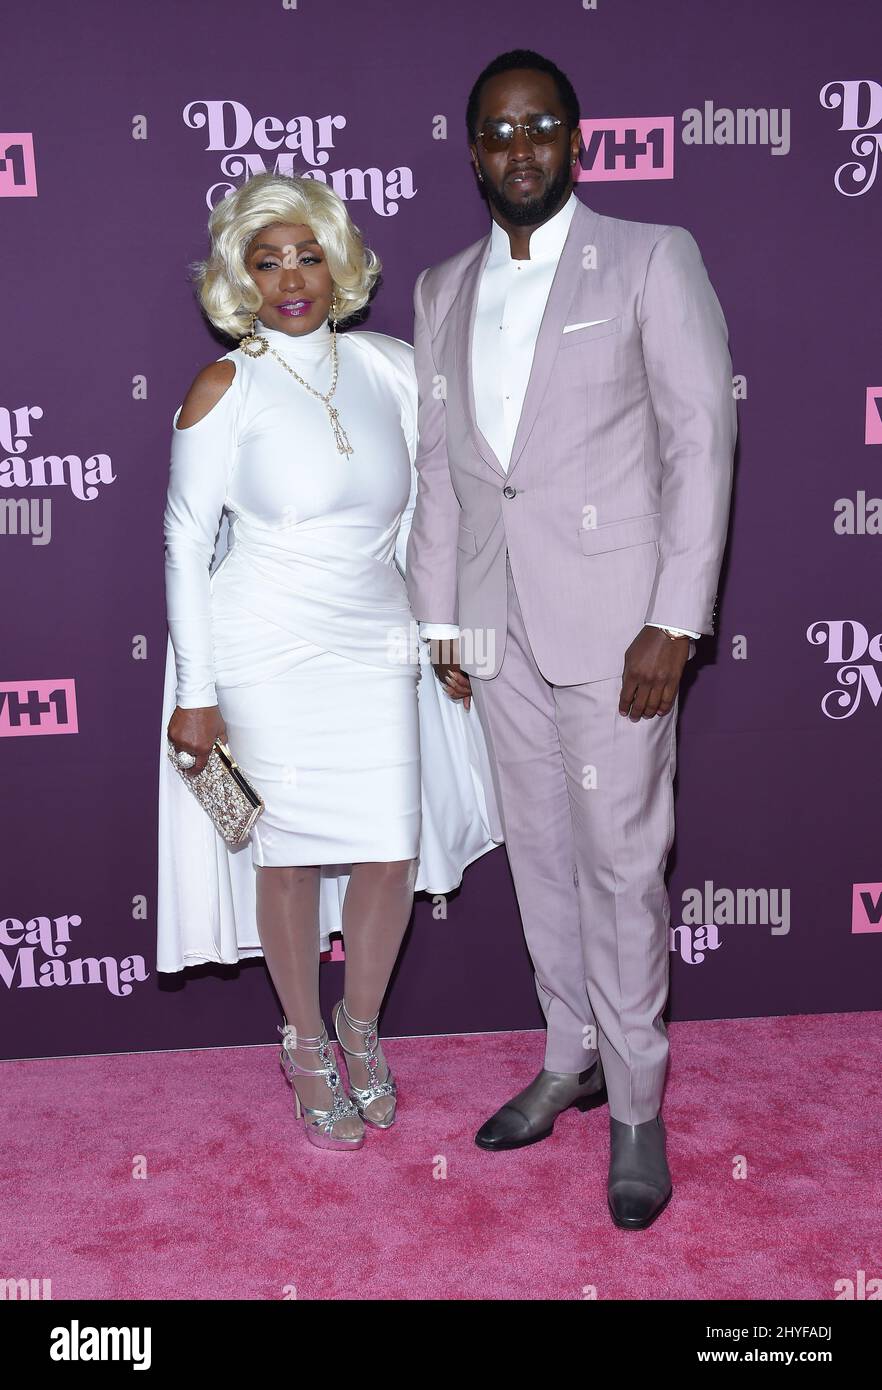 Sean Diddy Combs and Janice Combs at VH1's 3rd Annual 'Dear Mama: A Love Letter to Moms'€ event at The Theatre at ACE Hotel on May 3, 2018 in Los Angeles, CA. Stock Photo